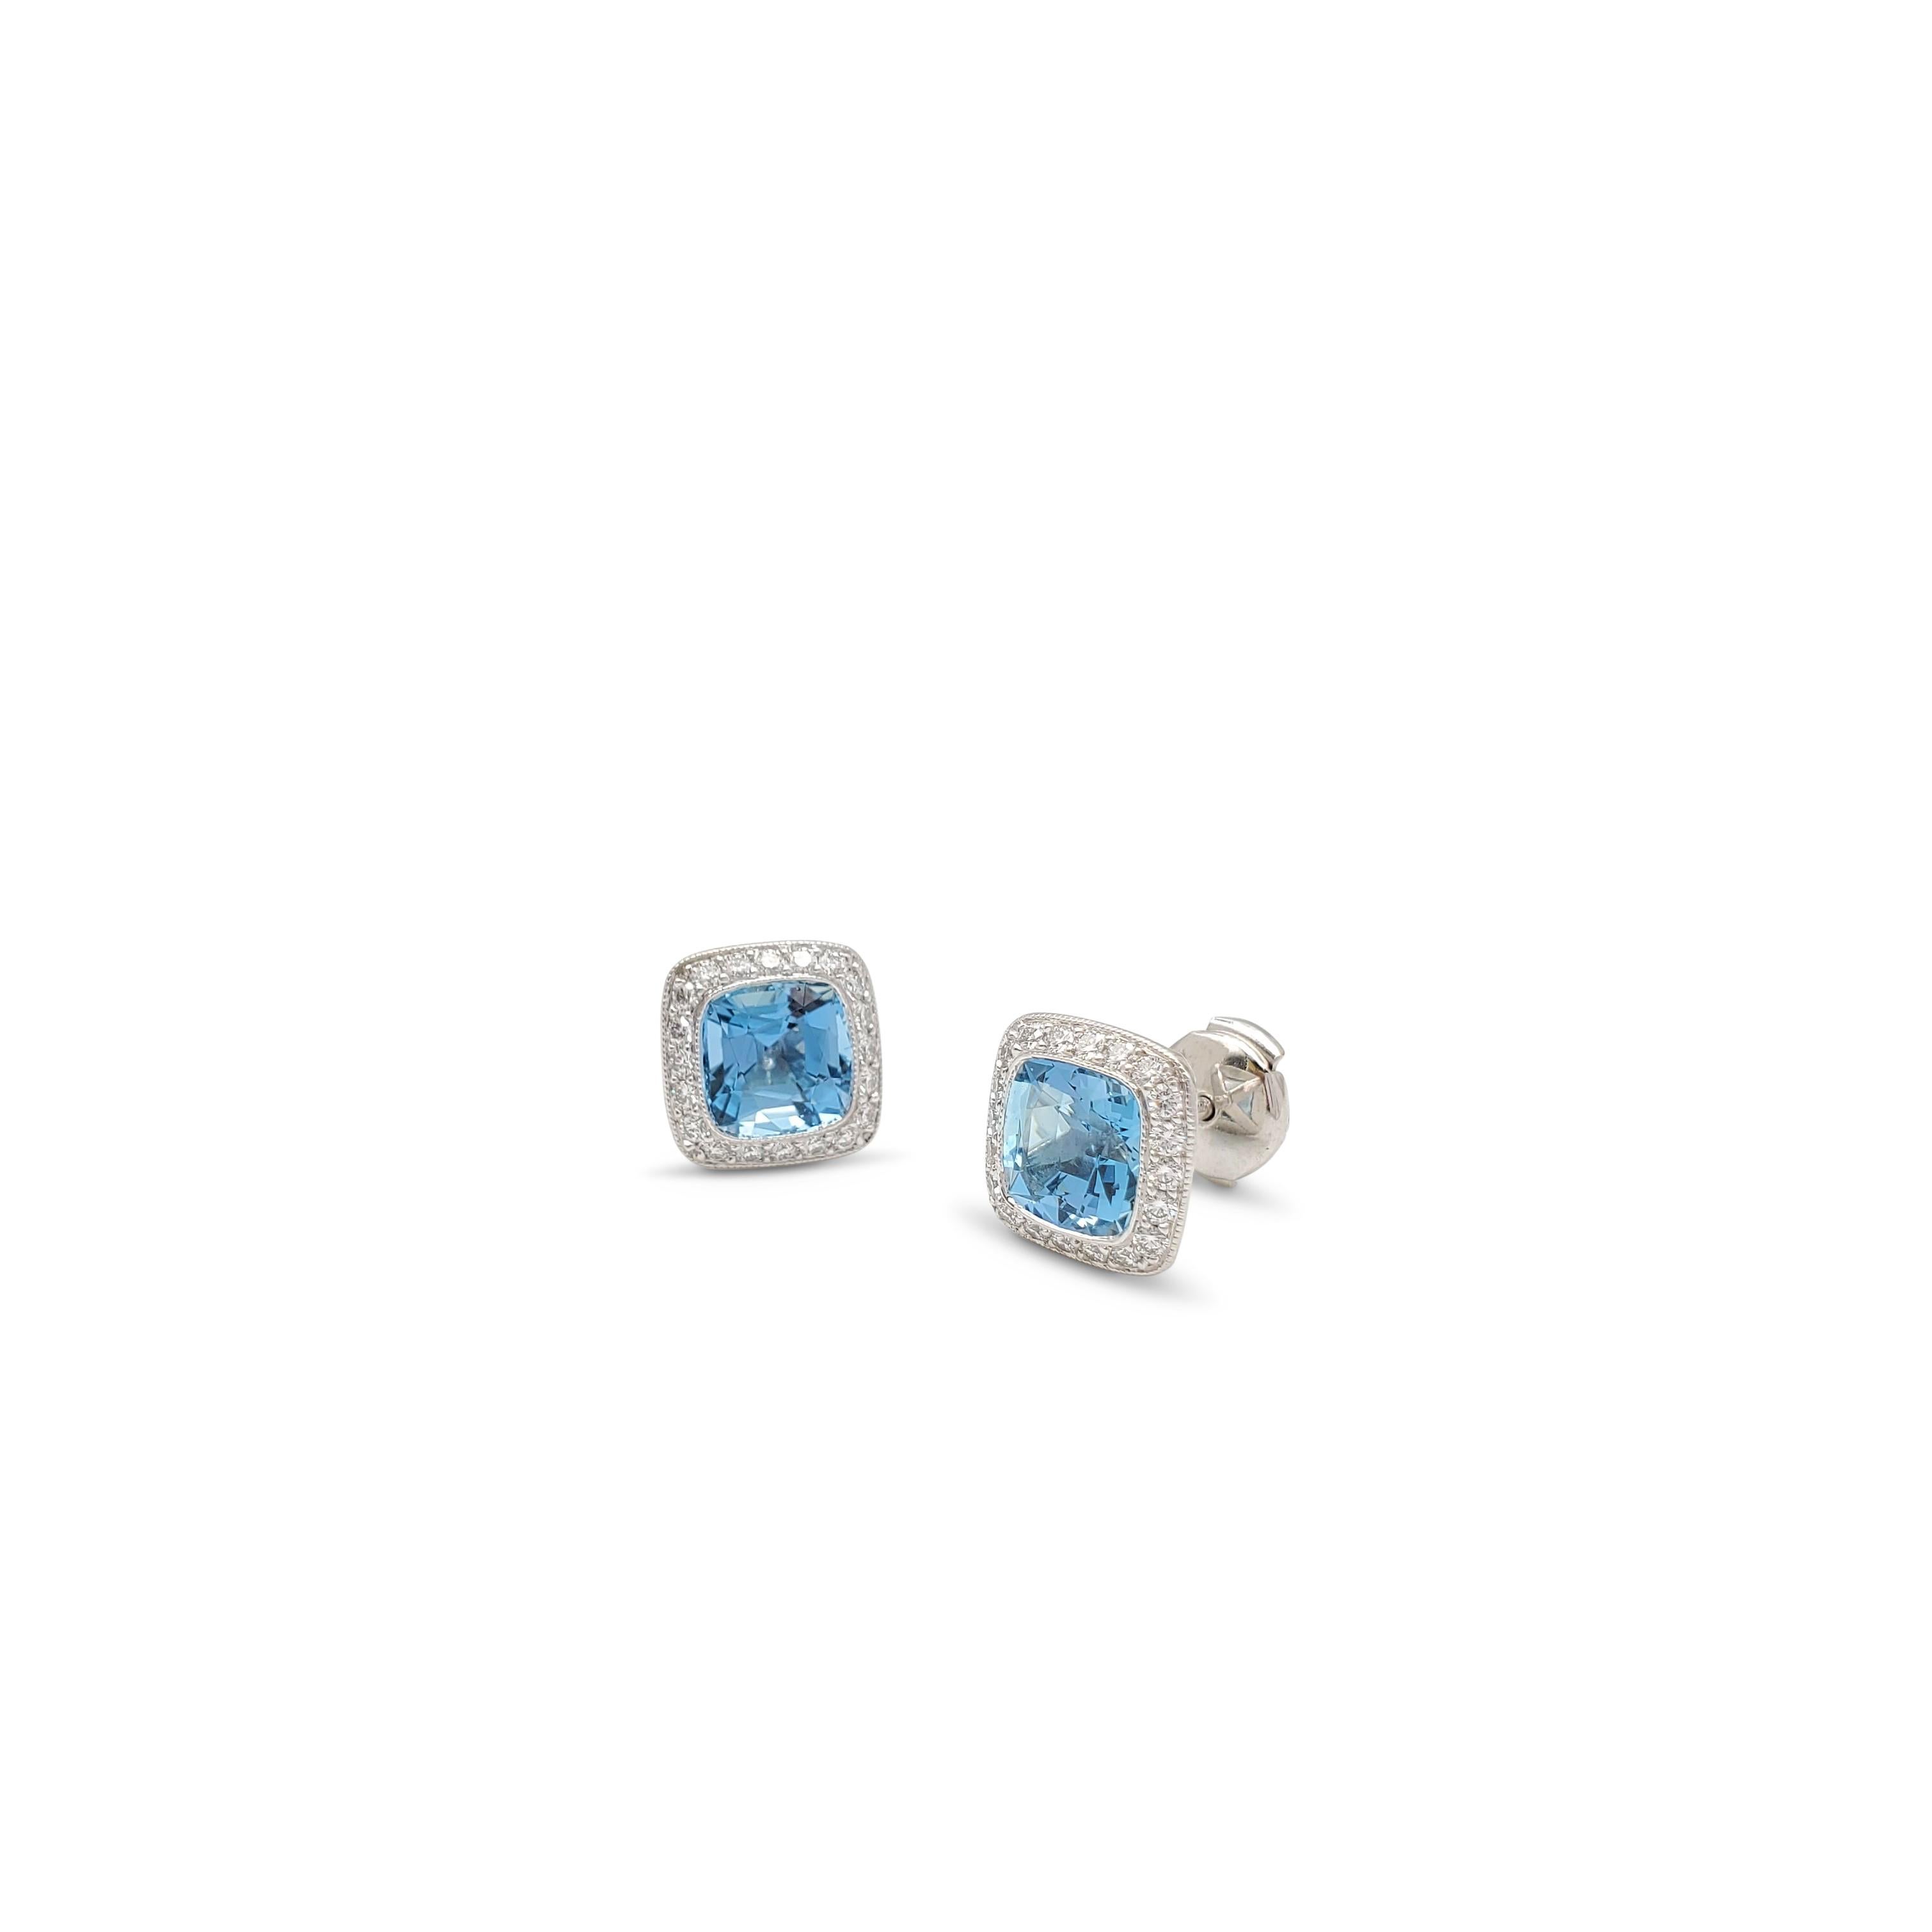 Authentic Tiffany & Co. 'Legacy' earrings crafted in platinum, center on cushion cut aquamarine stones weighing an estimated 4.00 carats. The vibrant aquamarine stones are surrounded by high-quality round brilliant cut diamonds (E-F color, VS